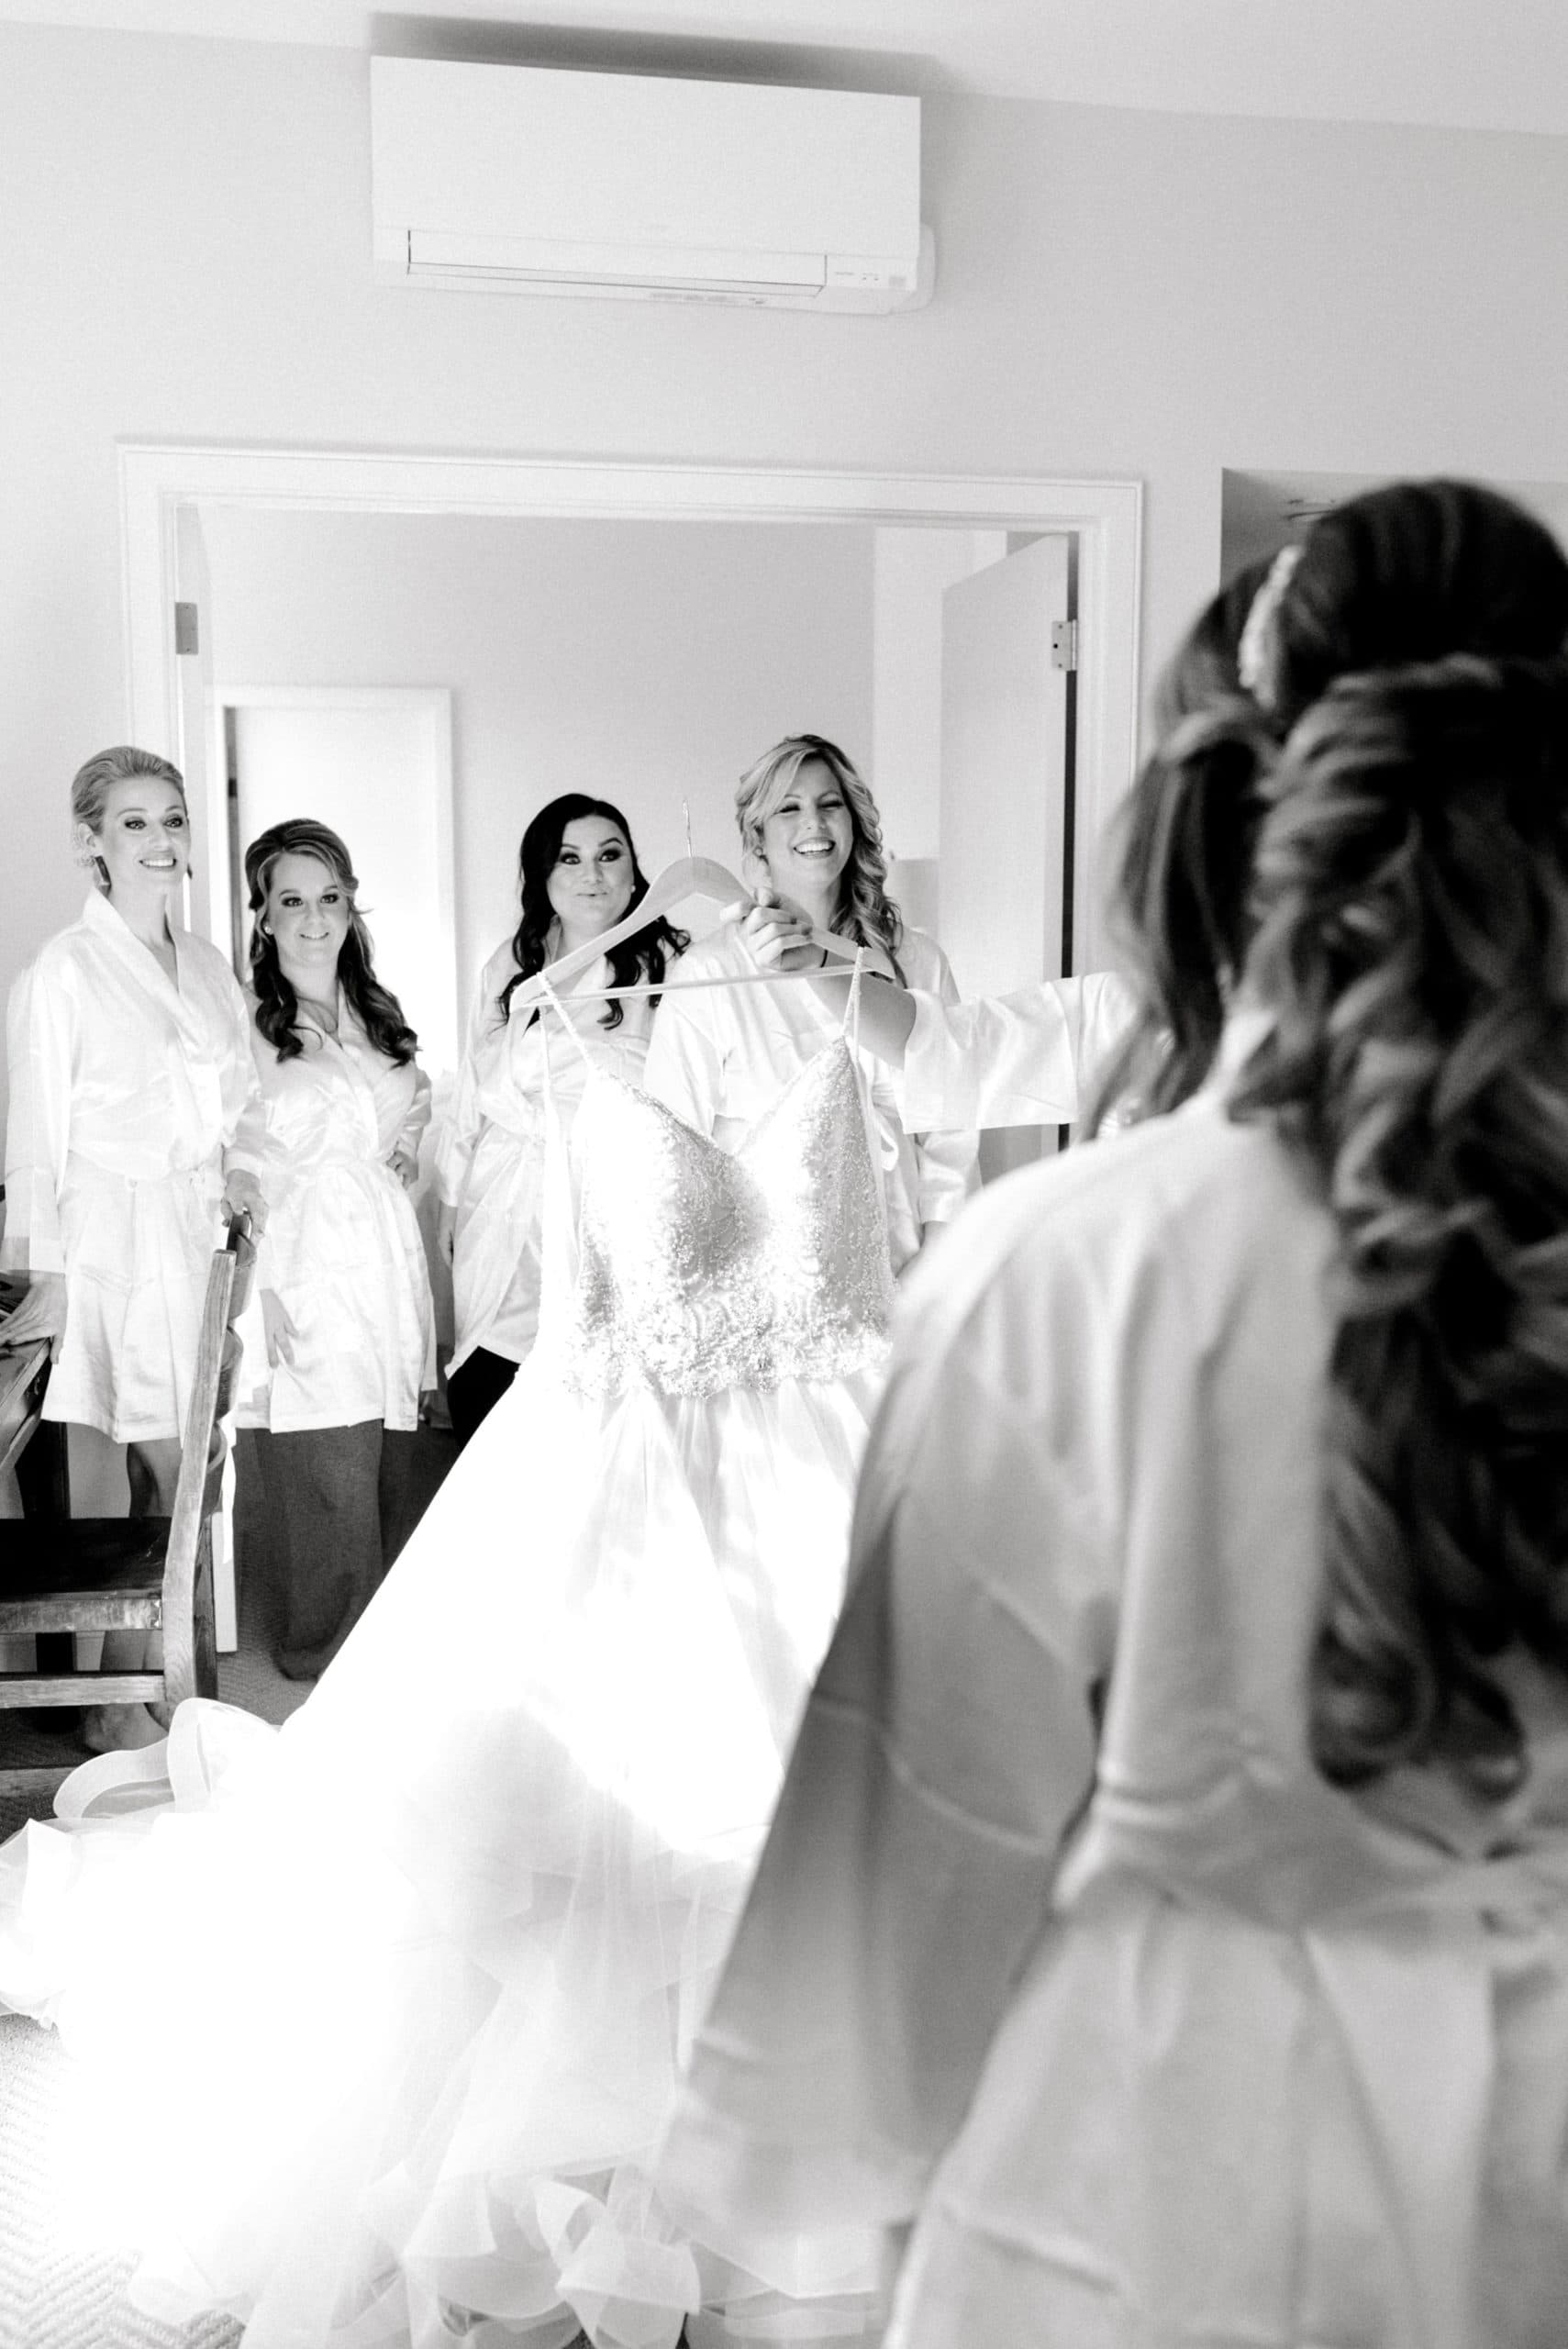 A bride gets ready for her wedding with her bridesmaids. Must-have wedding photos by Marcela Plosker, a Boston wedding photographer.